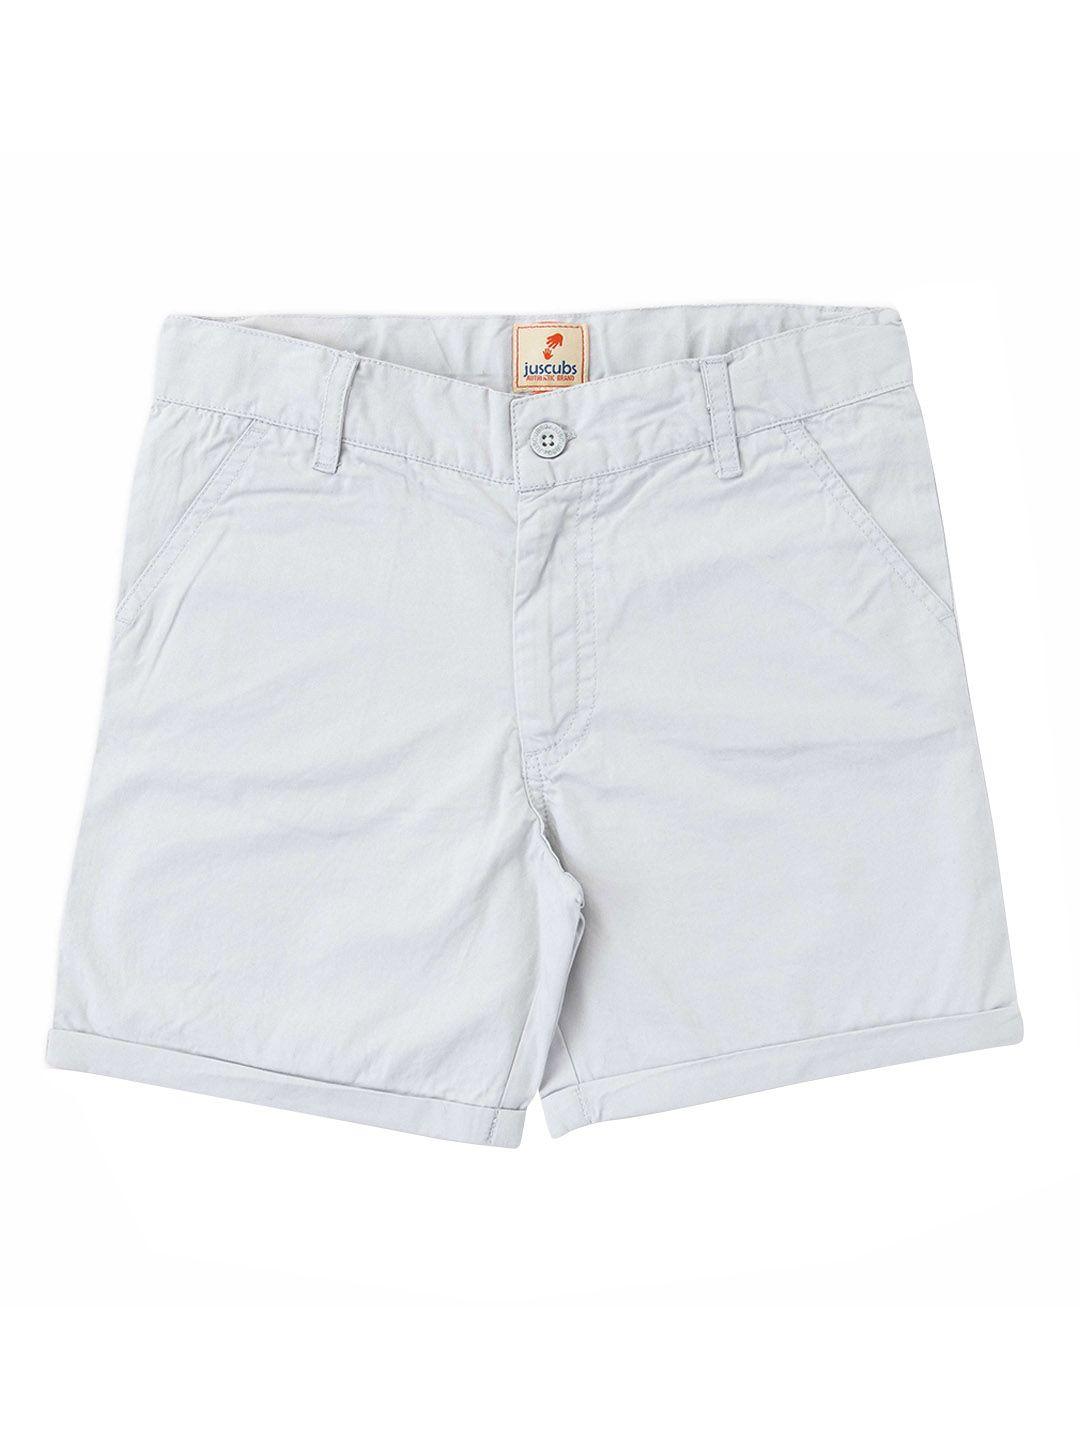 juscubs boys mid-rise cotton shorts